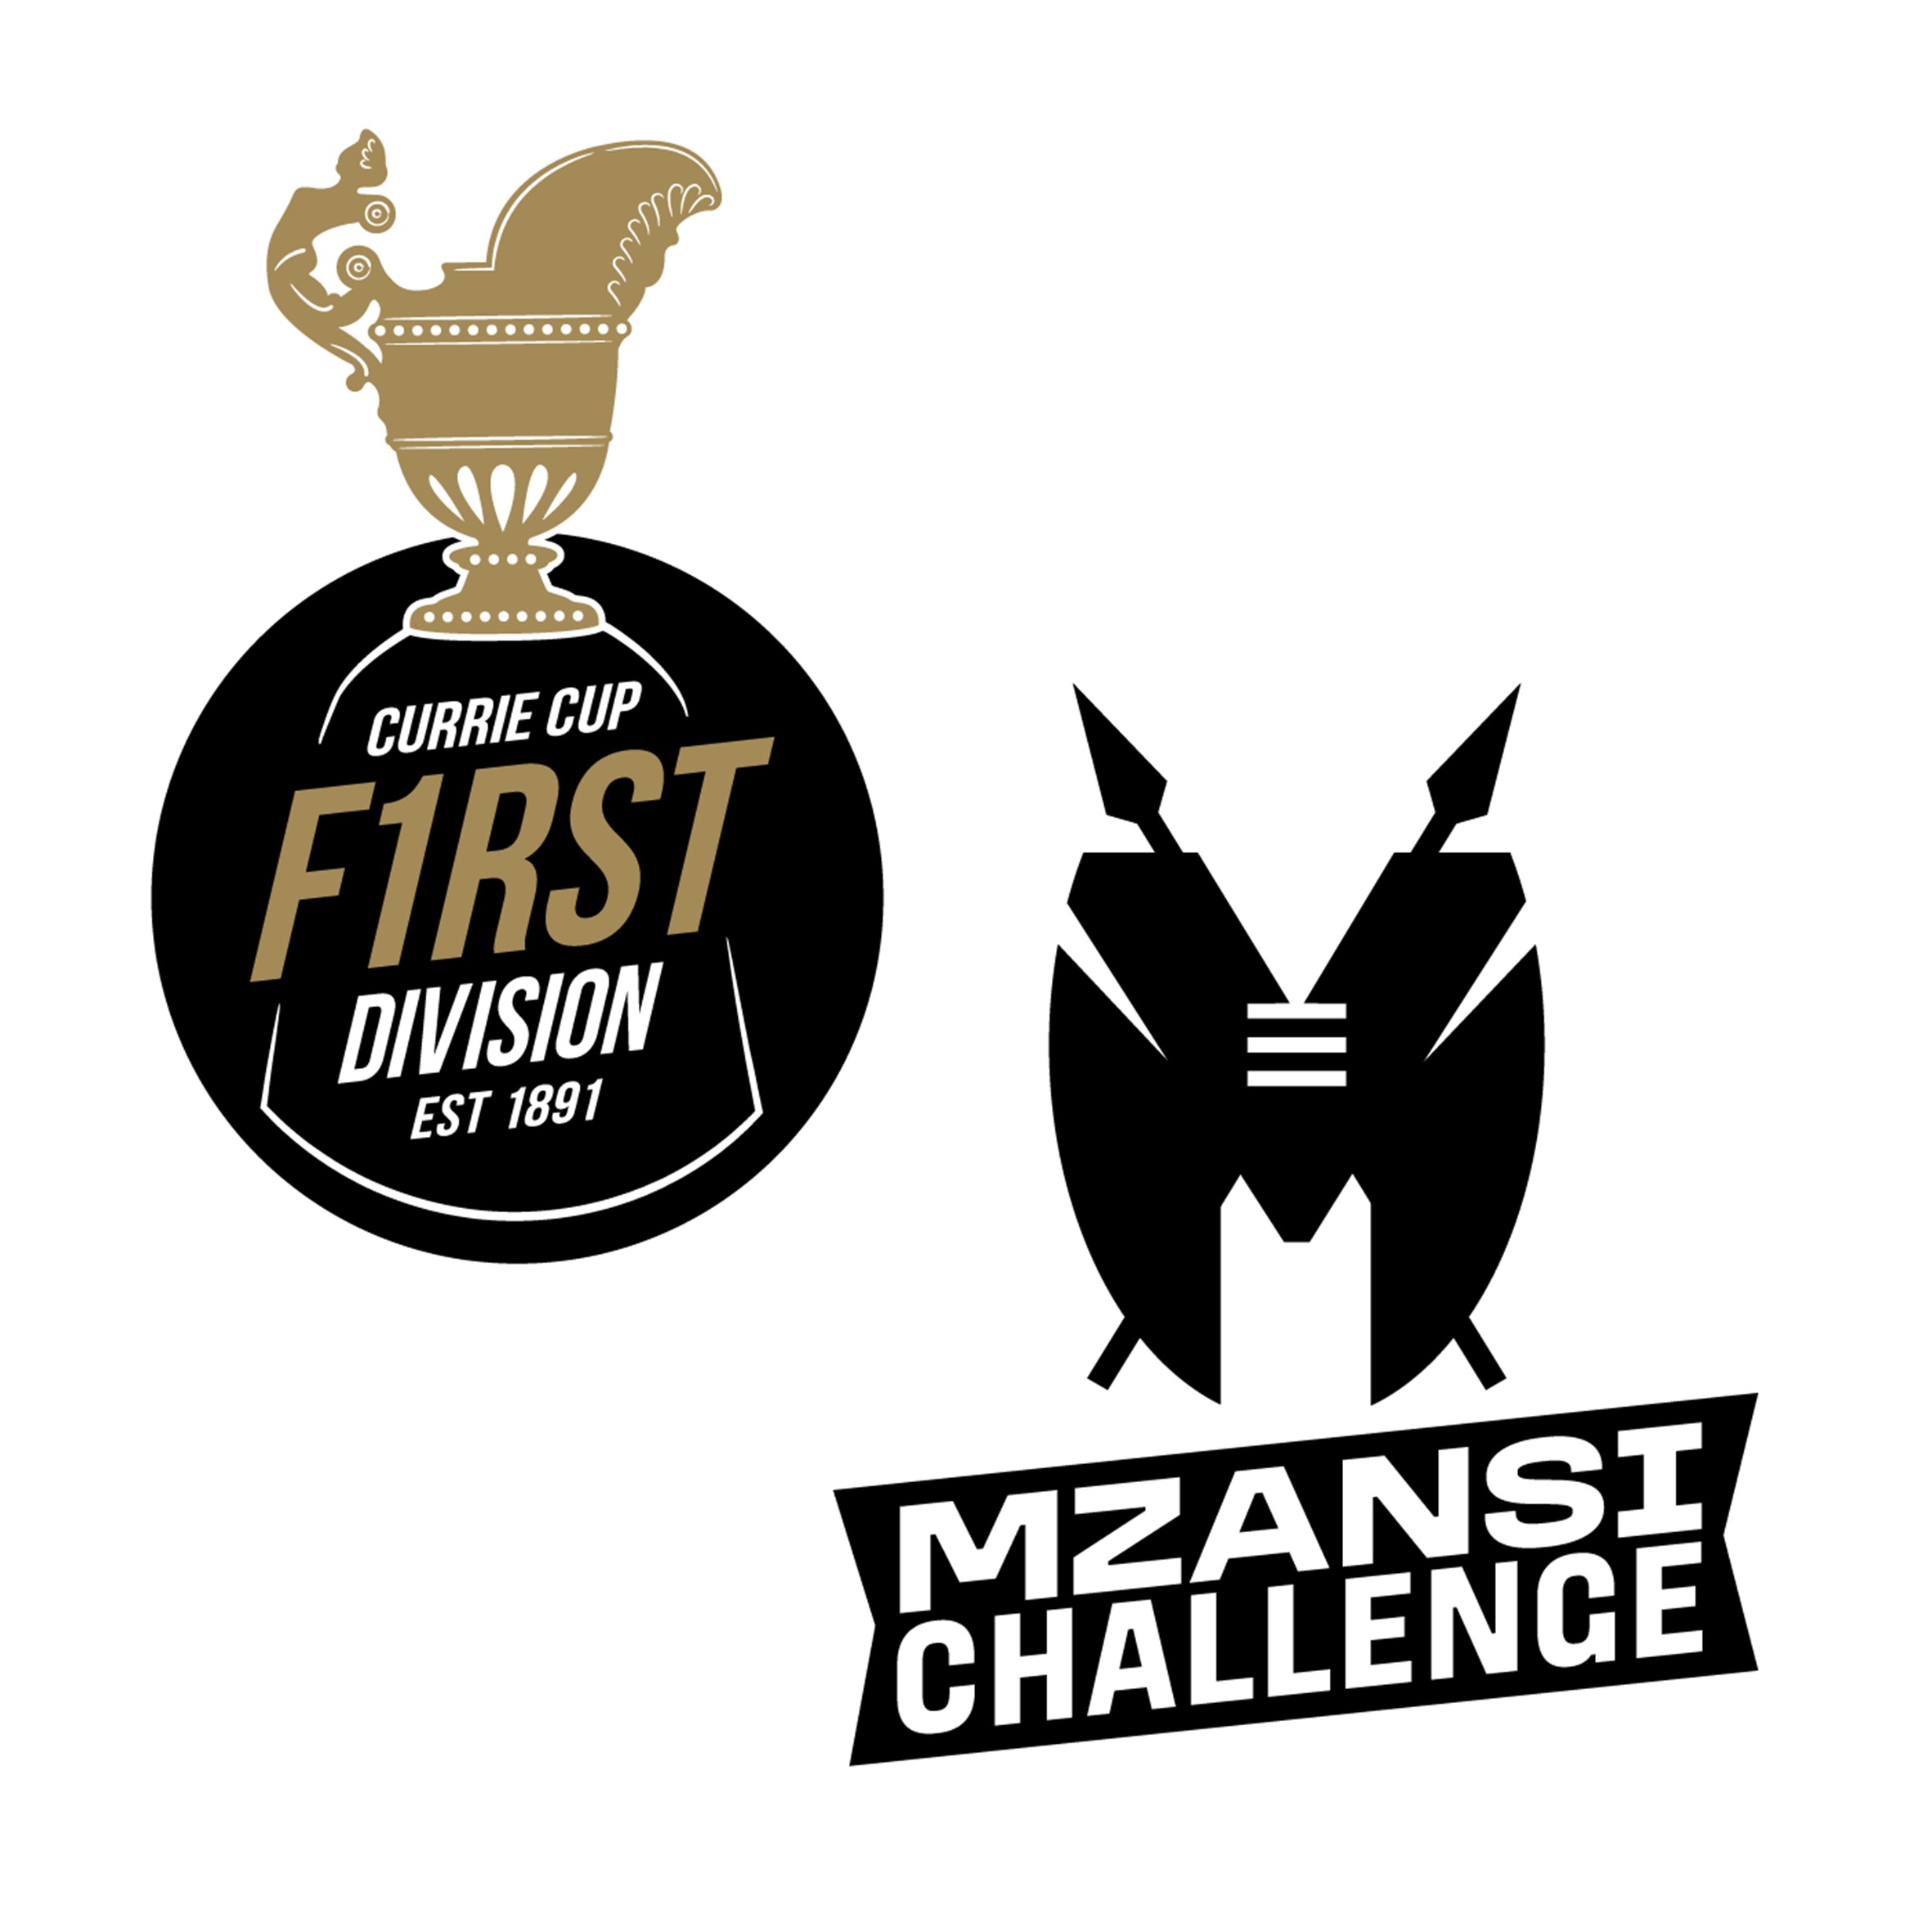 CURRIE CUP FIRST DIVISION | MZANSI CHALLENGE